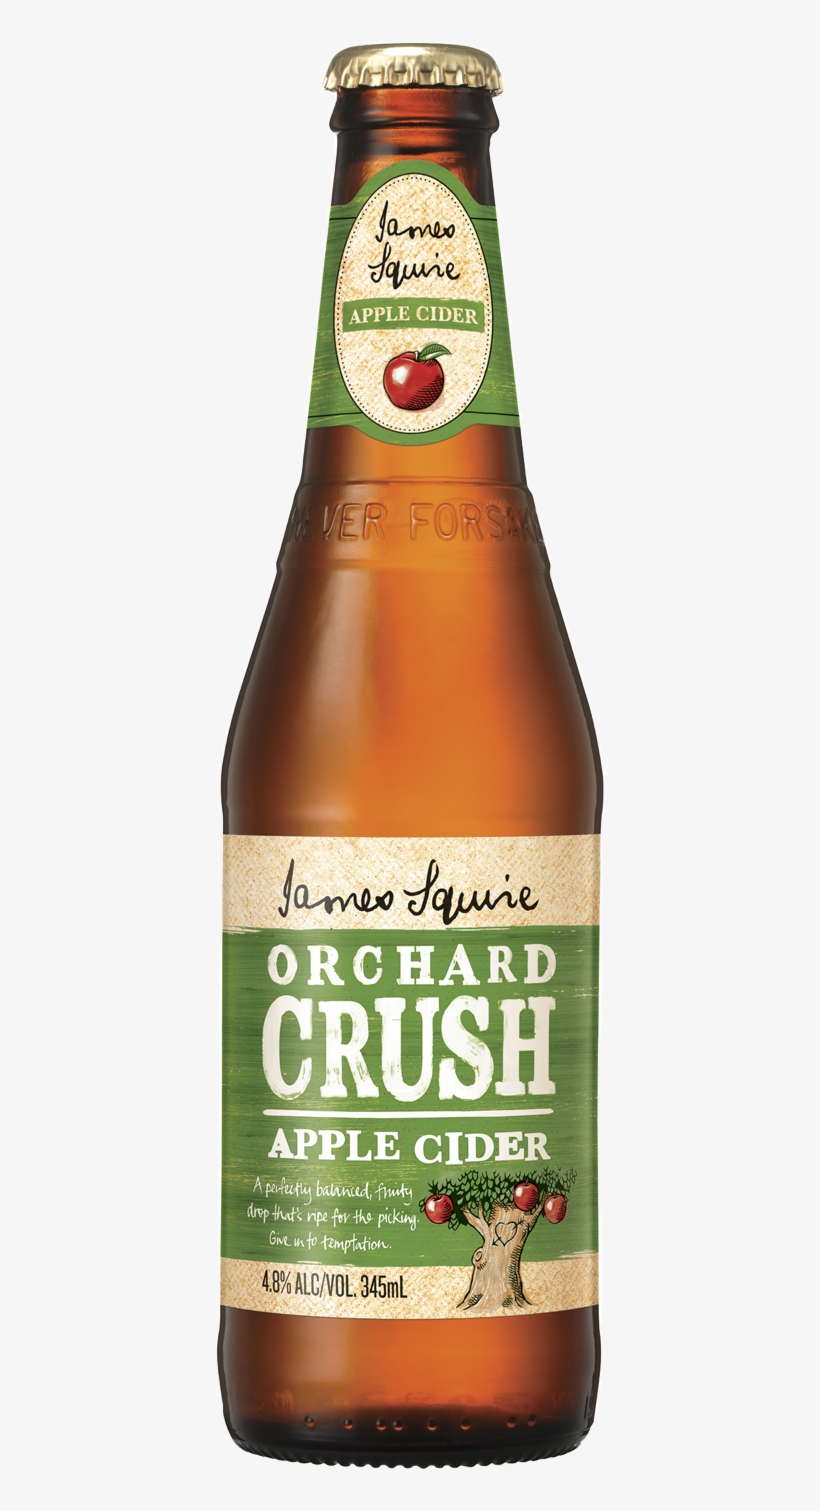 James Squire Orchard Crush Apple Cider 345ml - Apple Cider James Squire, transparent png #2030416